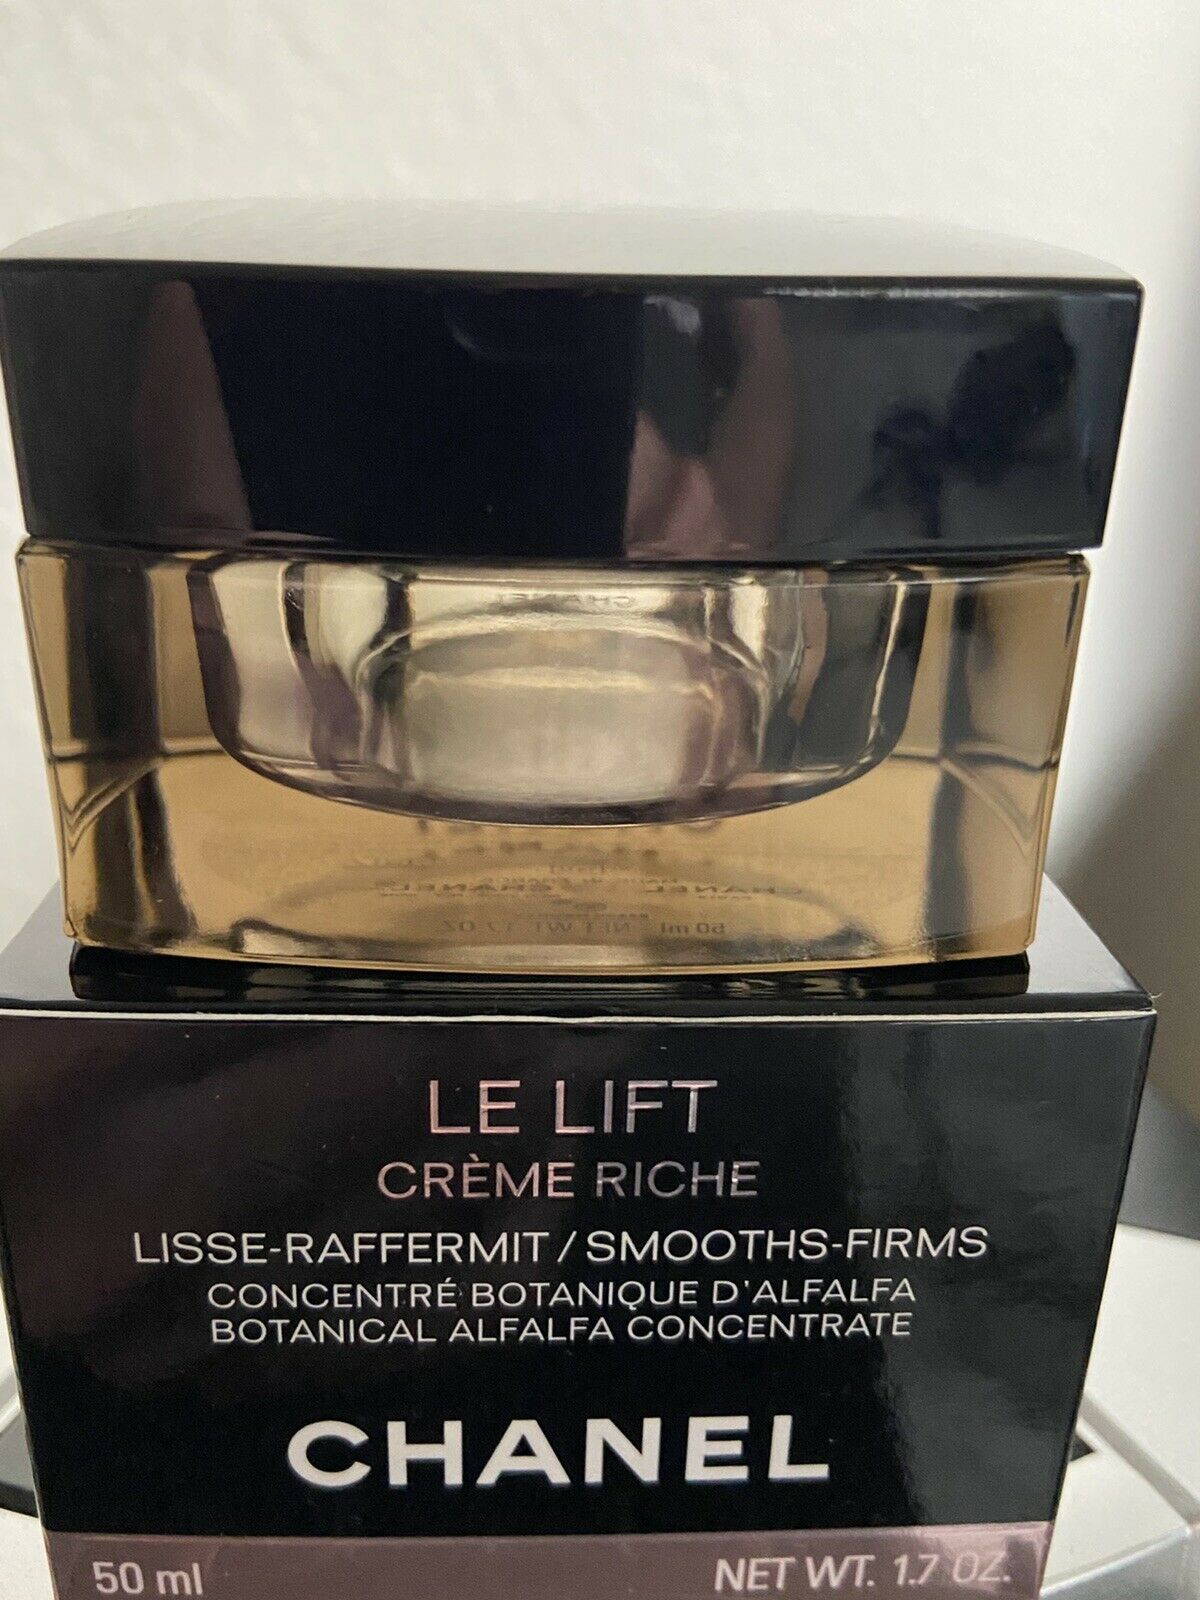 Chanel-le Lift-cosmetic Make Up Jar Empty Used  Clean In Box 50ml1.7 Oz. France